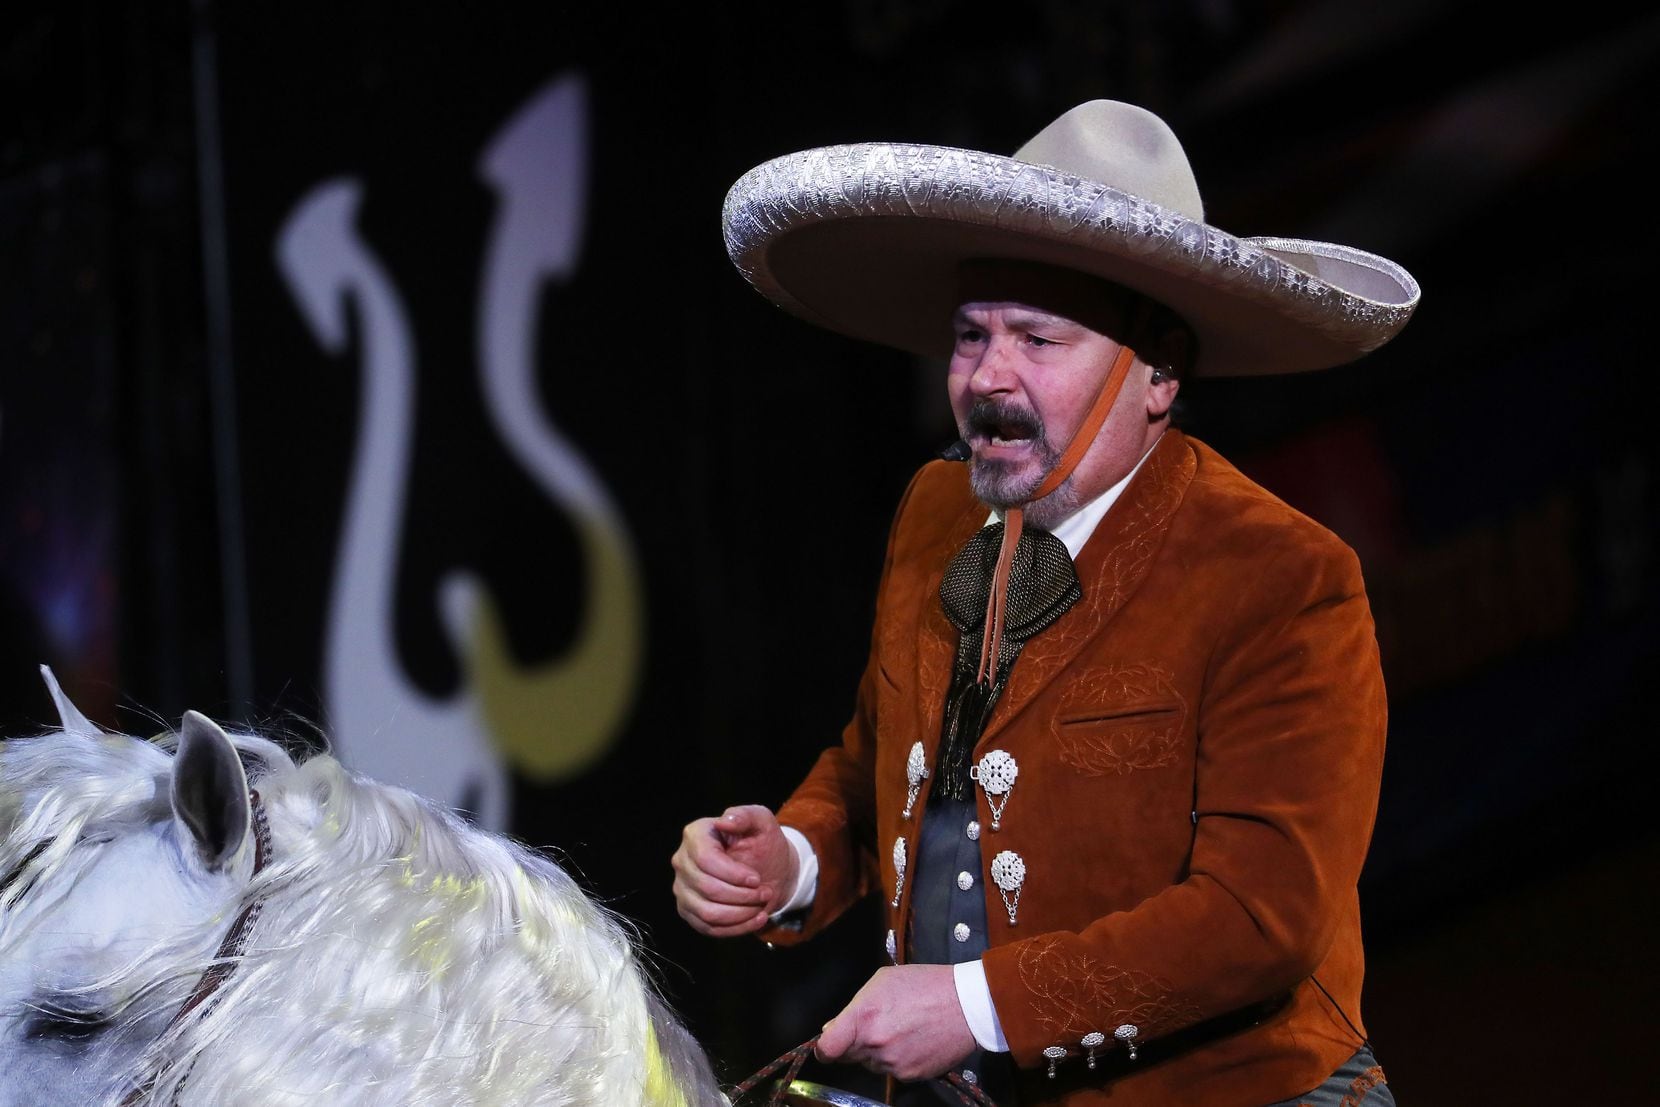 DALLAS, TX - OCTOBER 24: Singer Antonio Aguilar Jr. performs on stage during the "Jaripeo Sin Fronteras" Tour 2021 at American Airlines Center on Sunday October 24, 2021. (Photo Omar Vega / Al Dia)